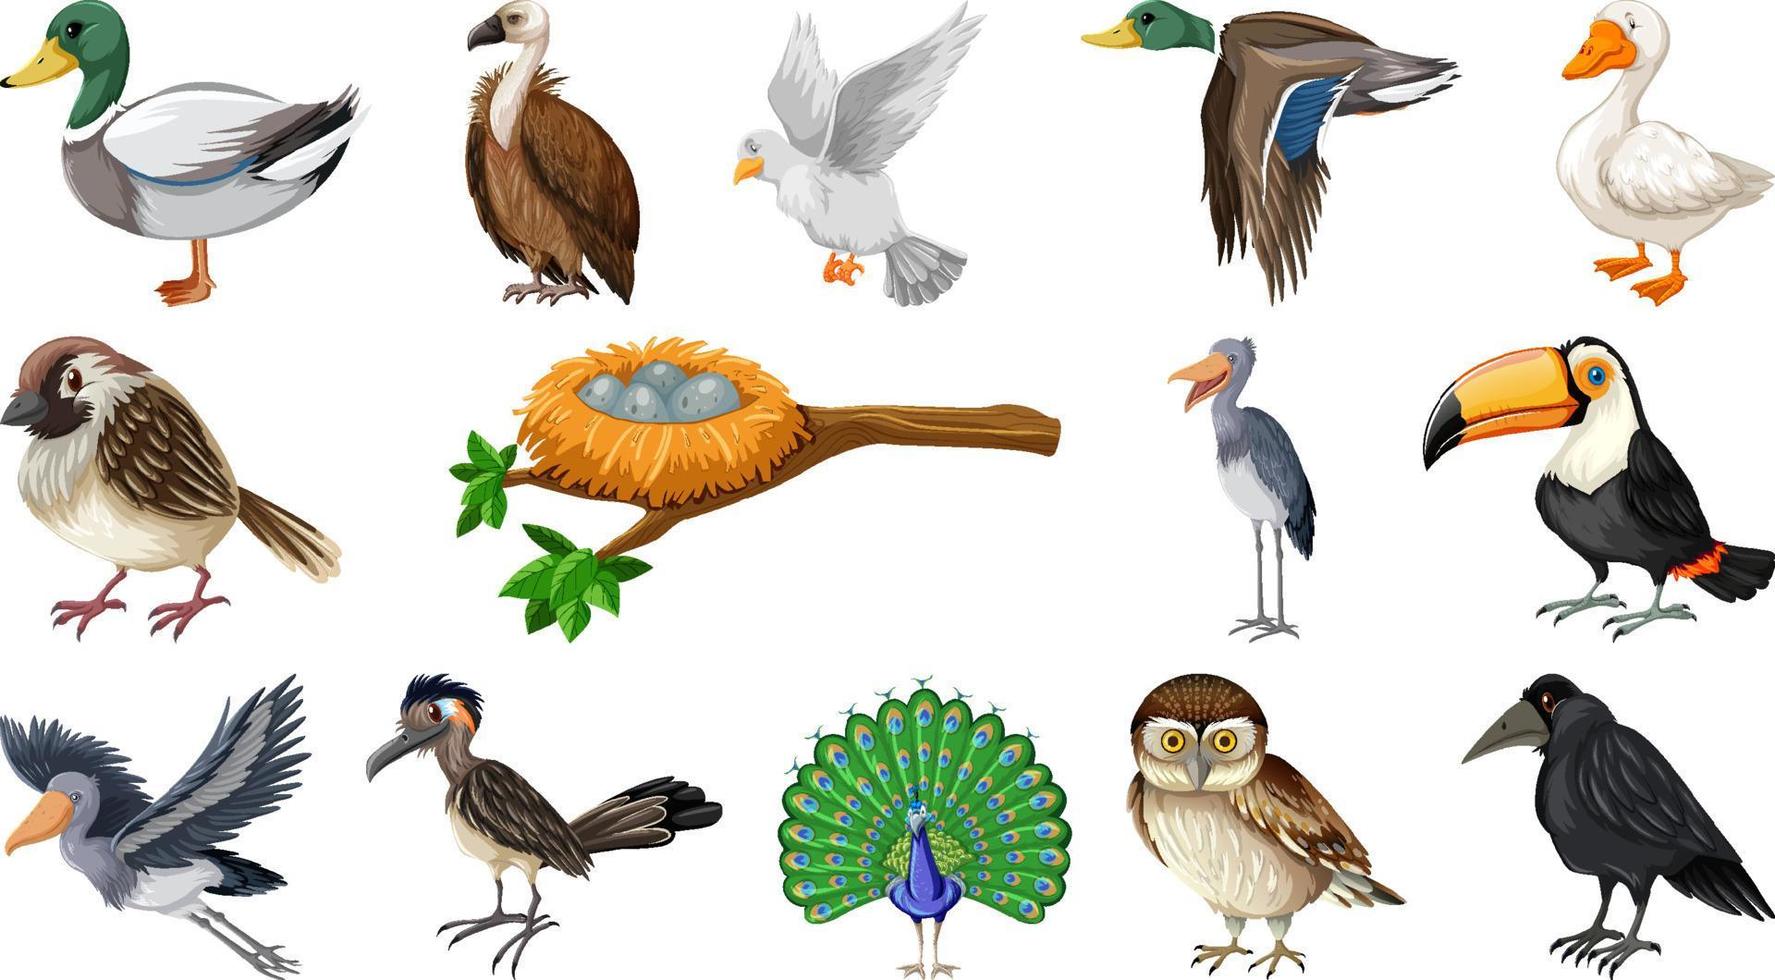 Different kinds of birds collection vector